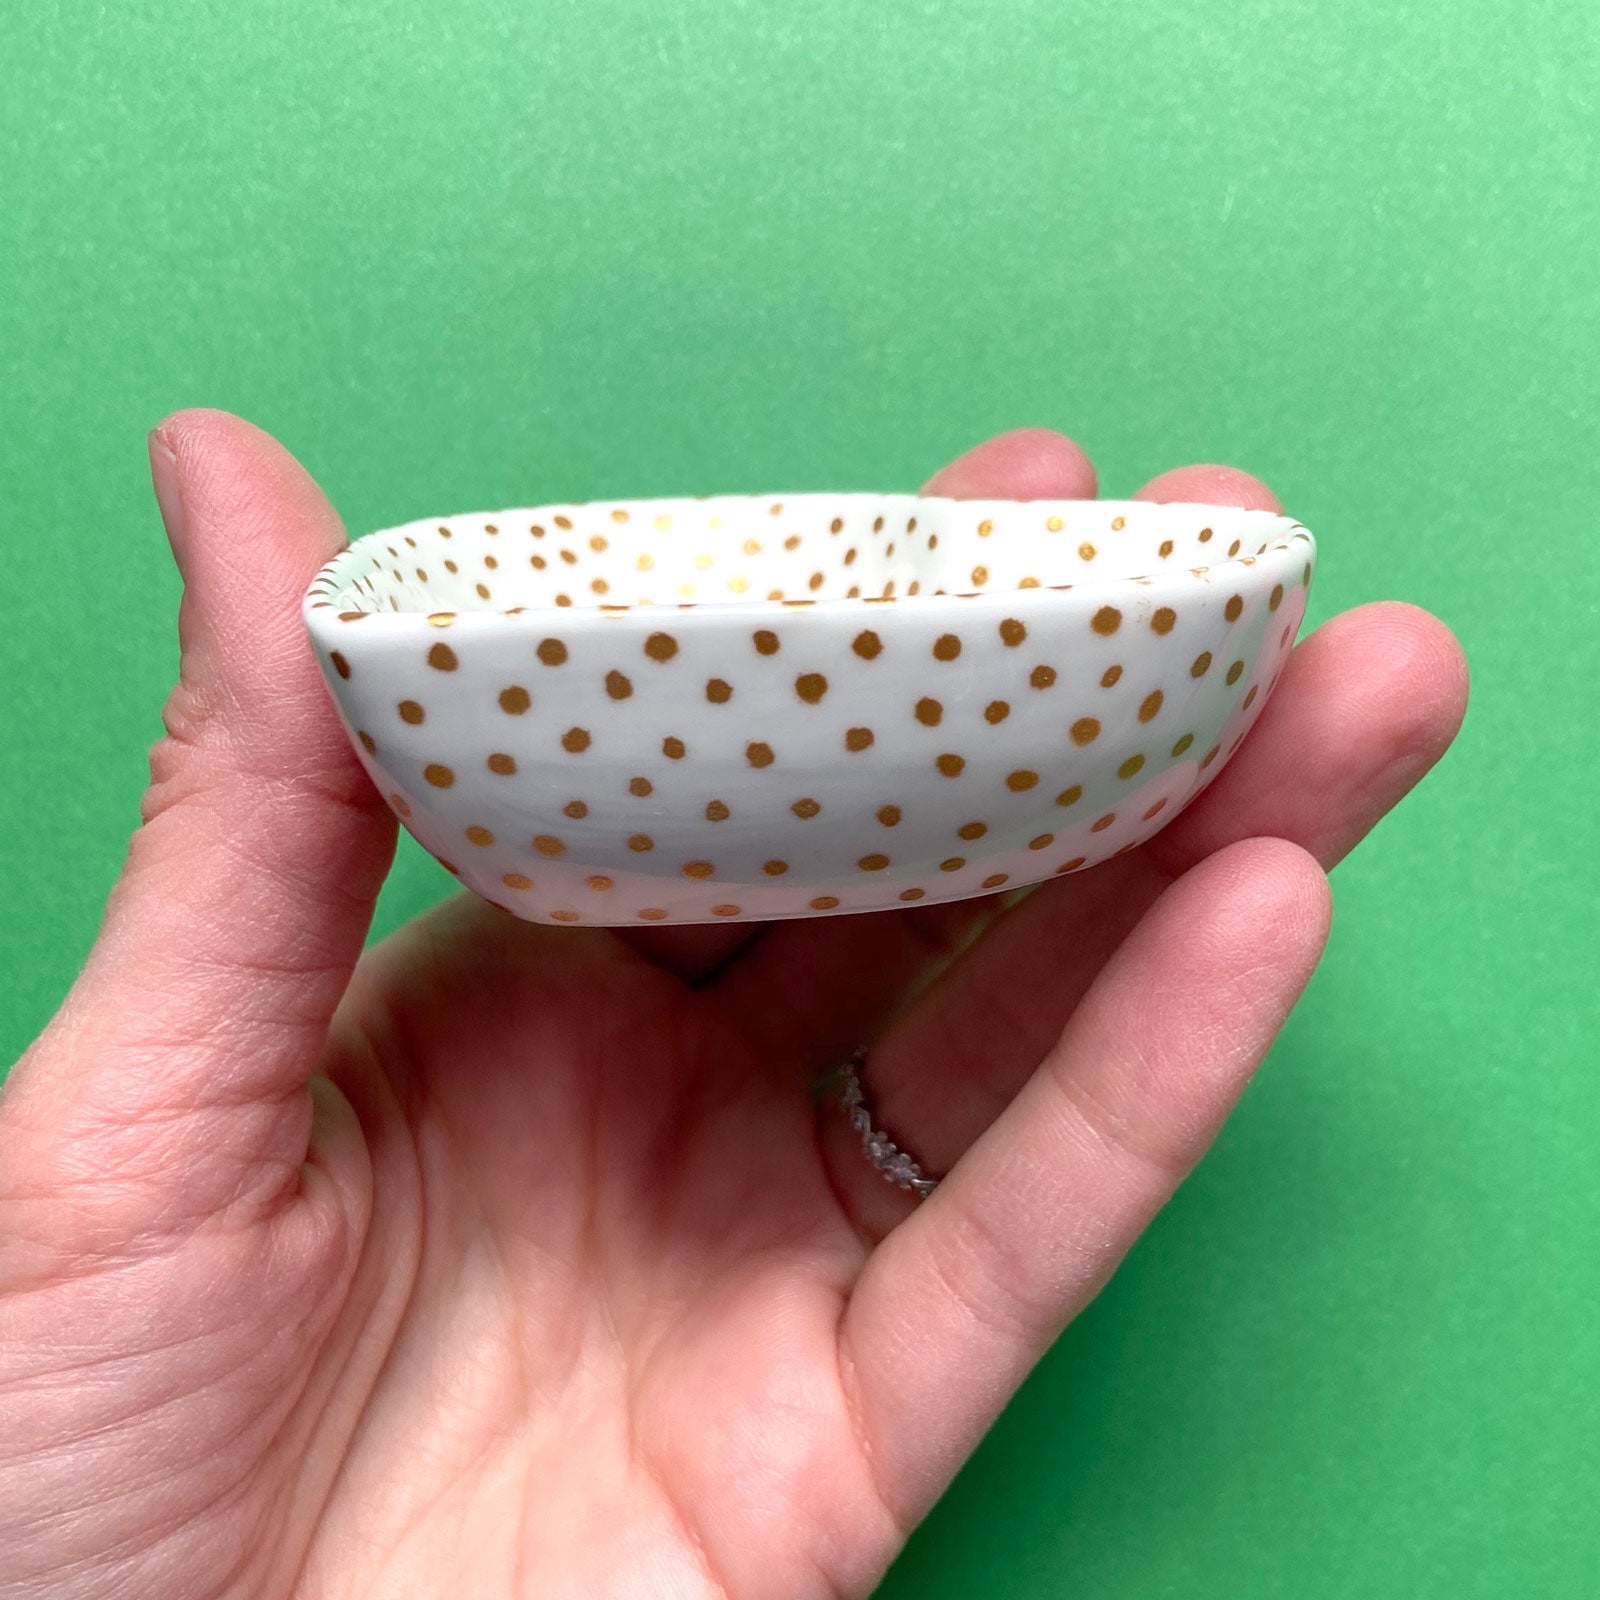 Gold Dot All Over 14  - Hand Painted Porcelain Heart Bowl